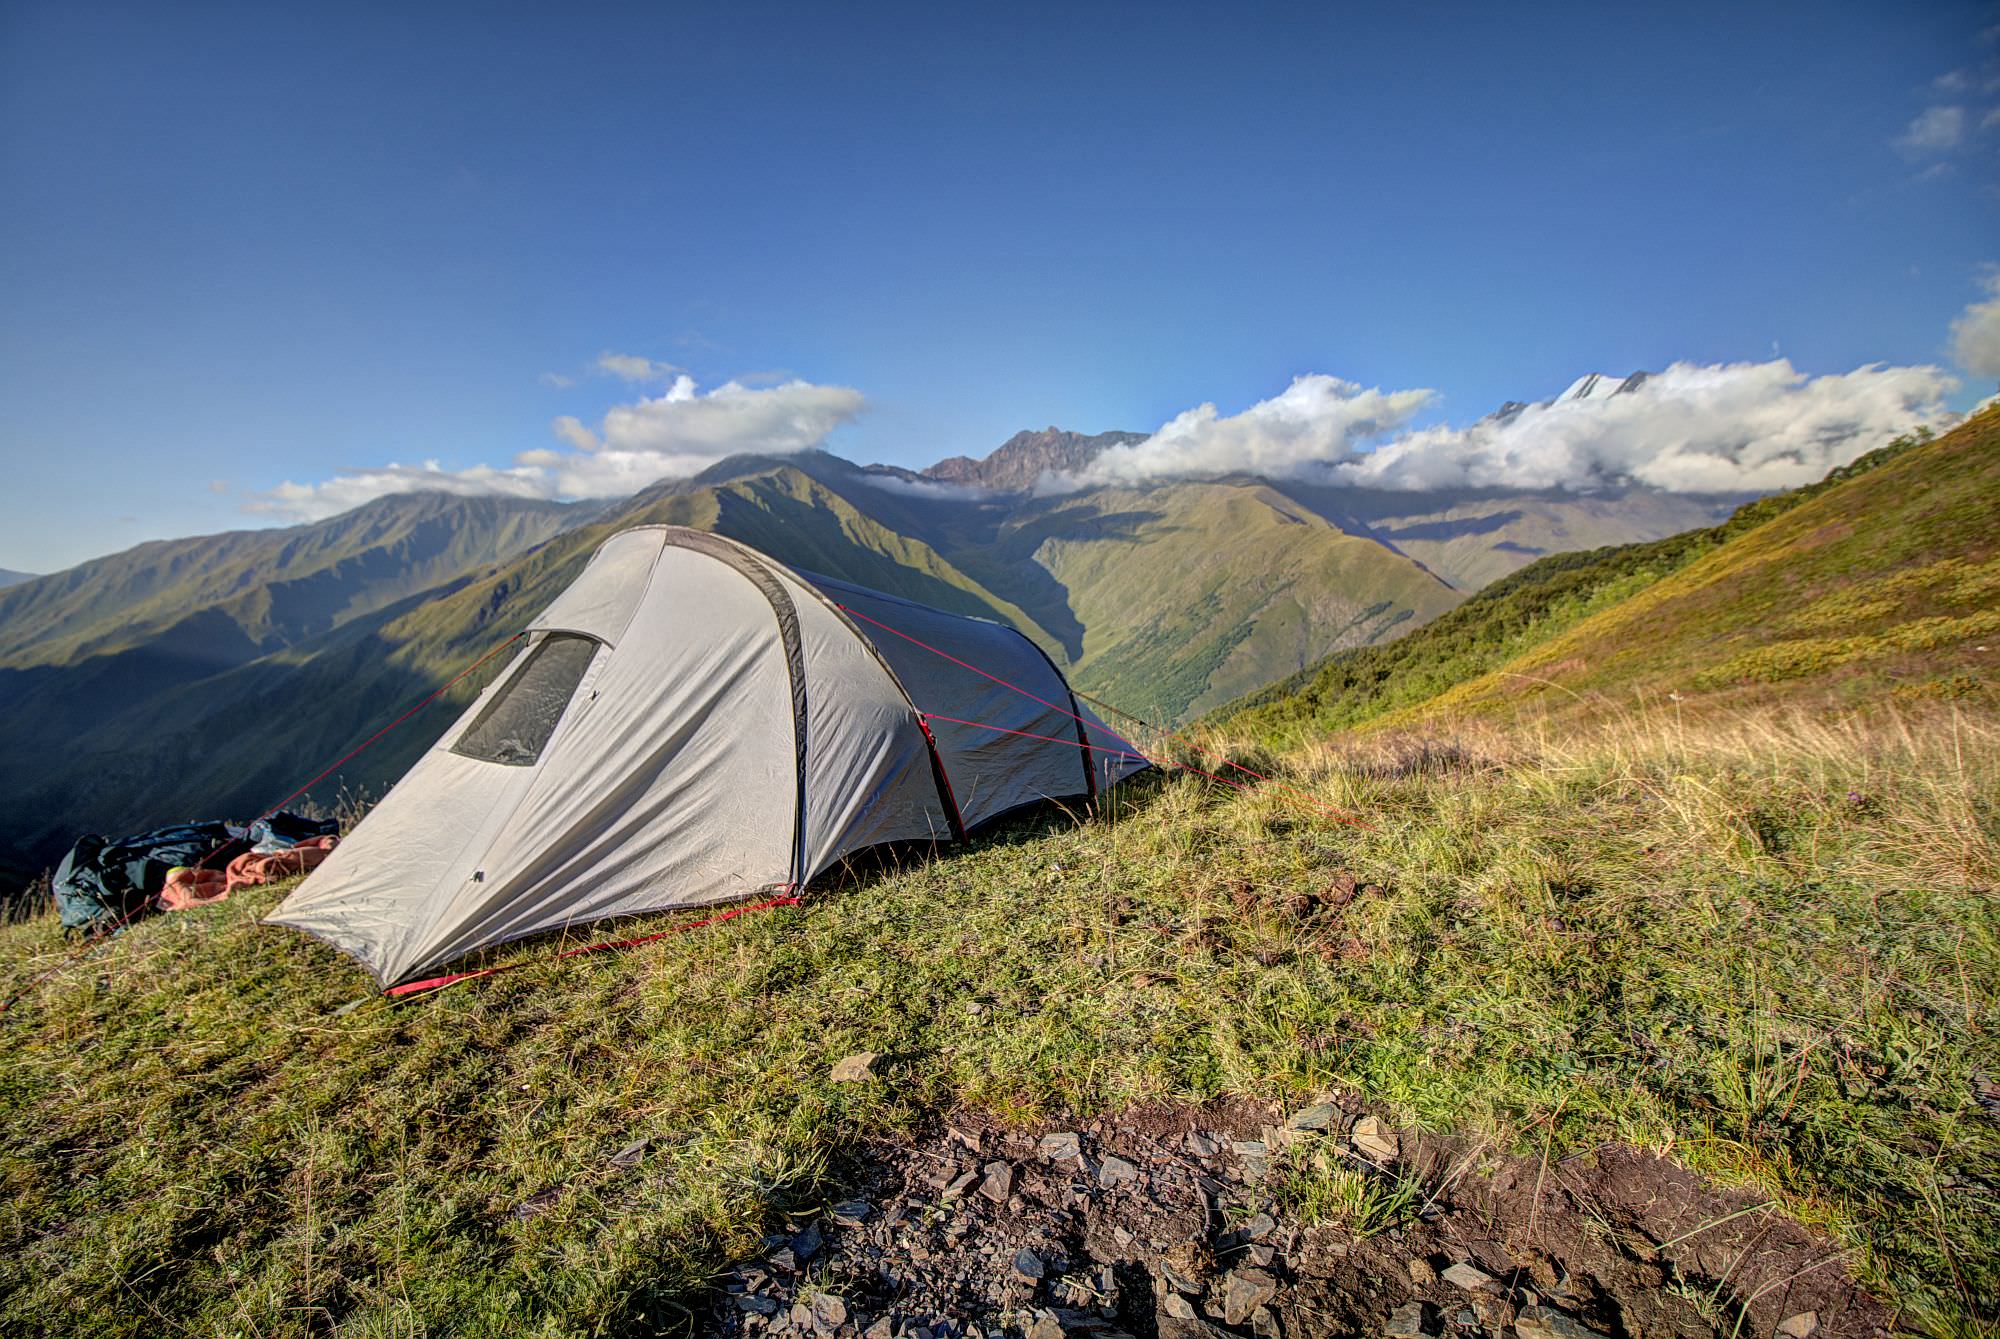 Camping beneath the Isirtghele pass